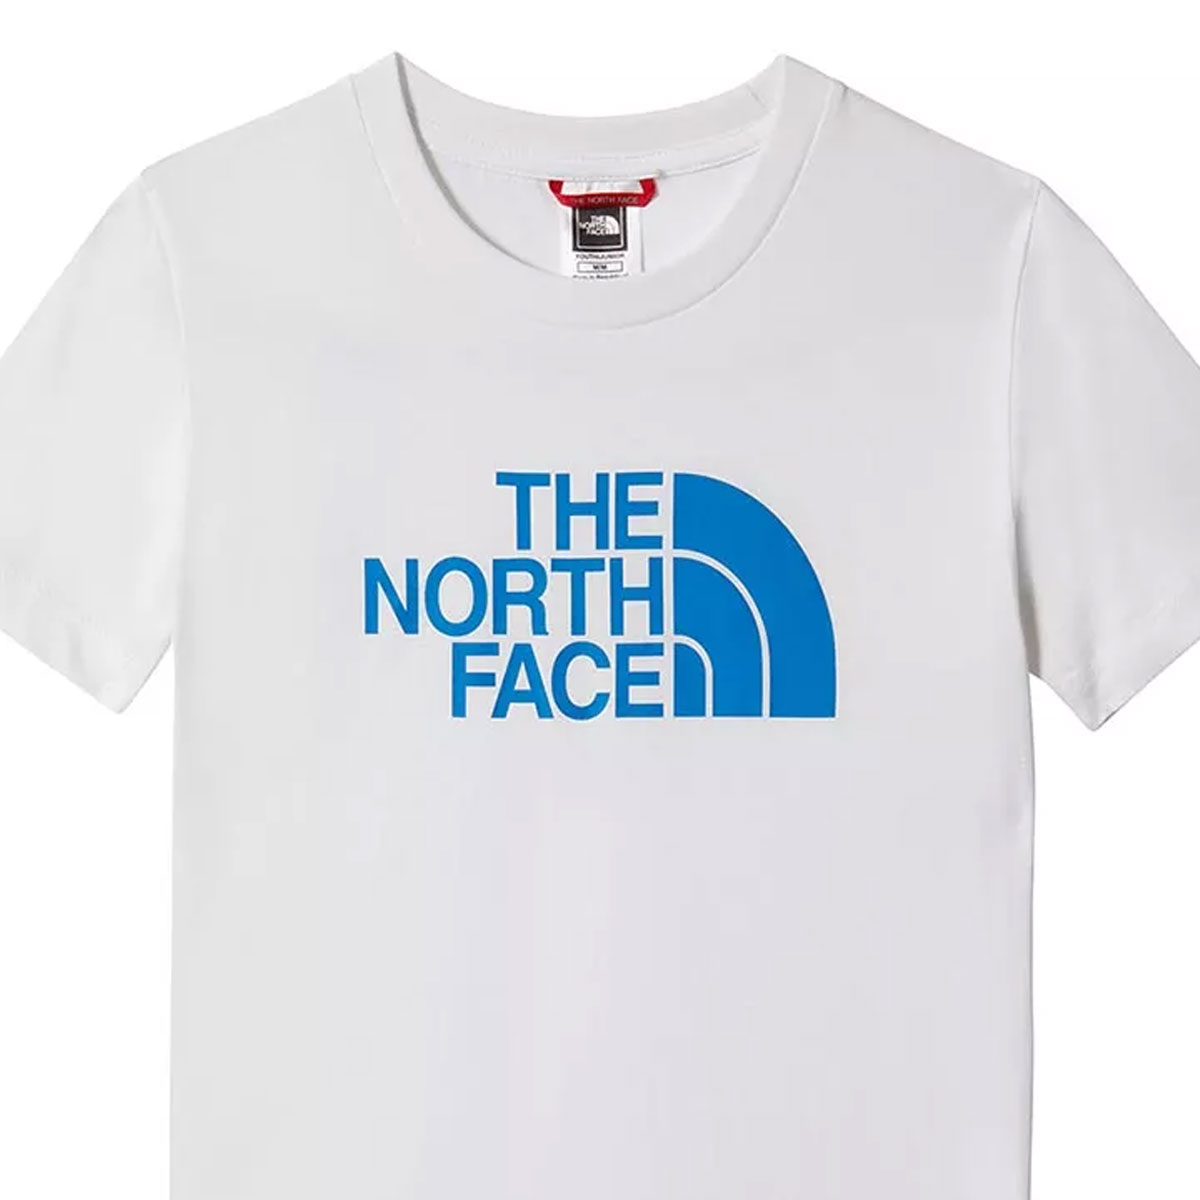 THE NORTH FACE - YOUTH EASY T-SHIRT